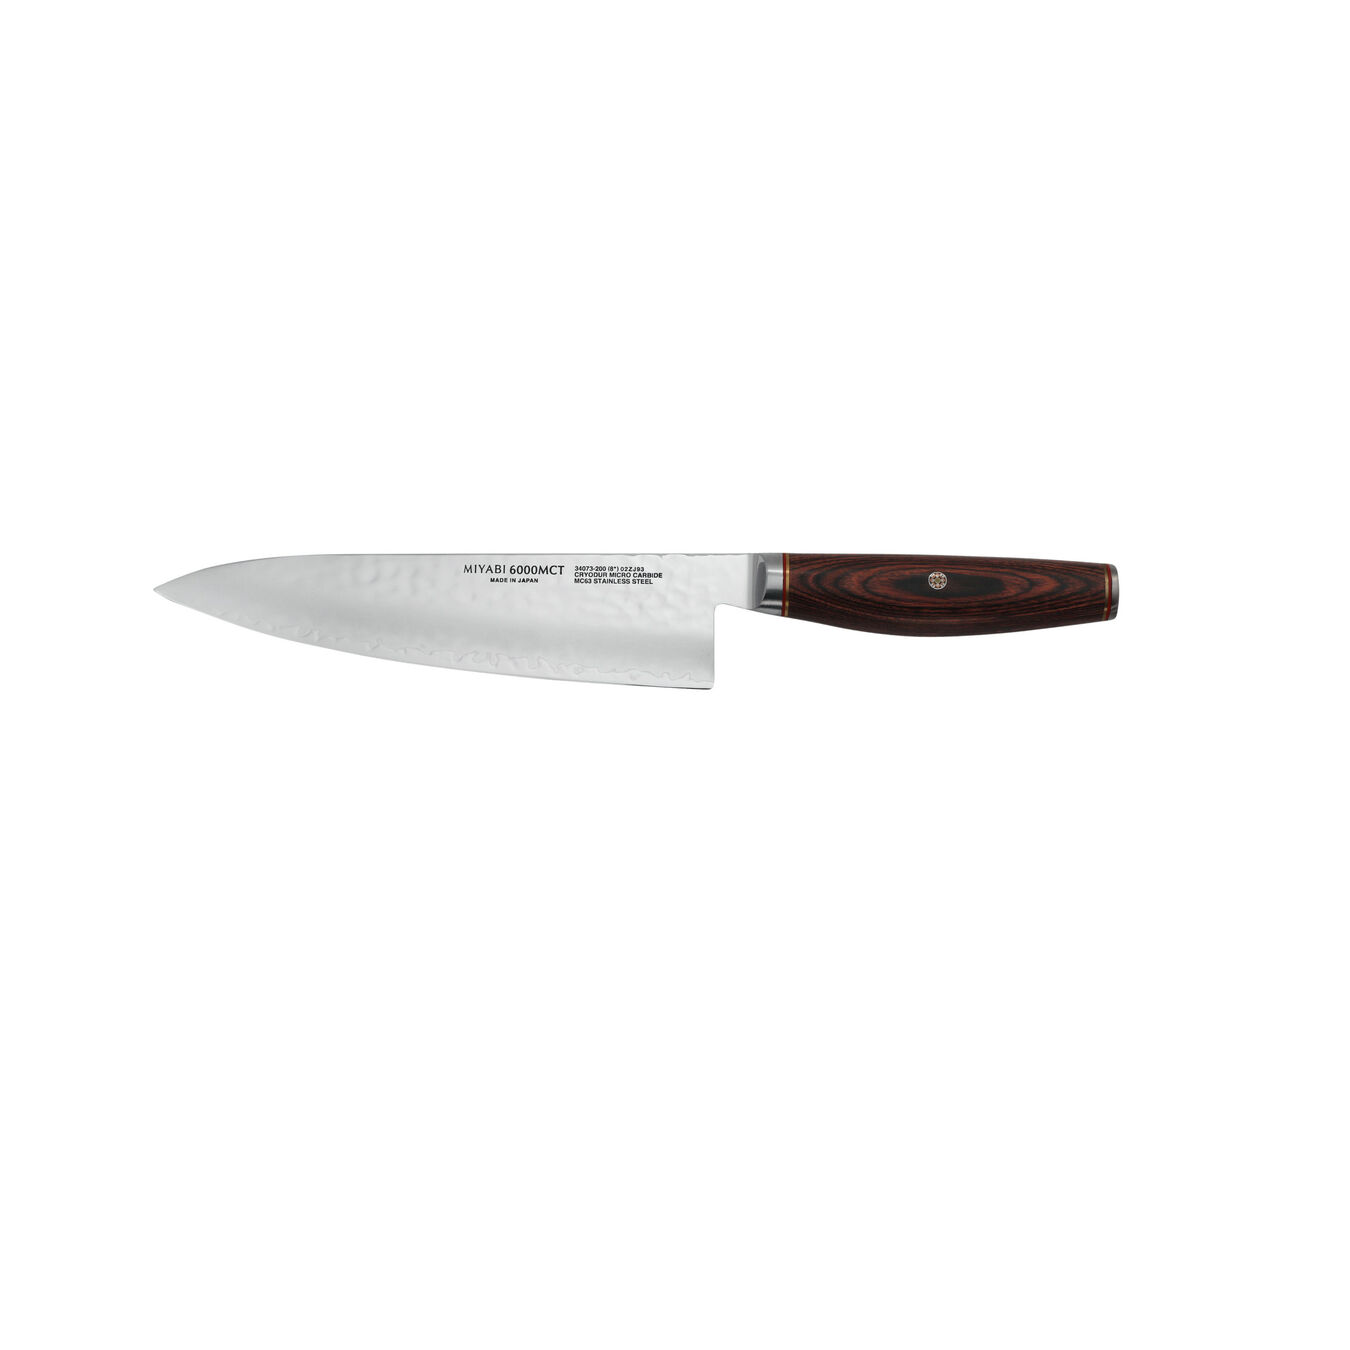 8-inch, Chef's Knife,,large 2